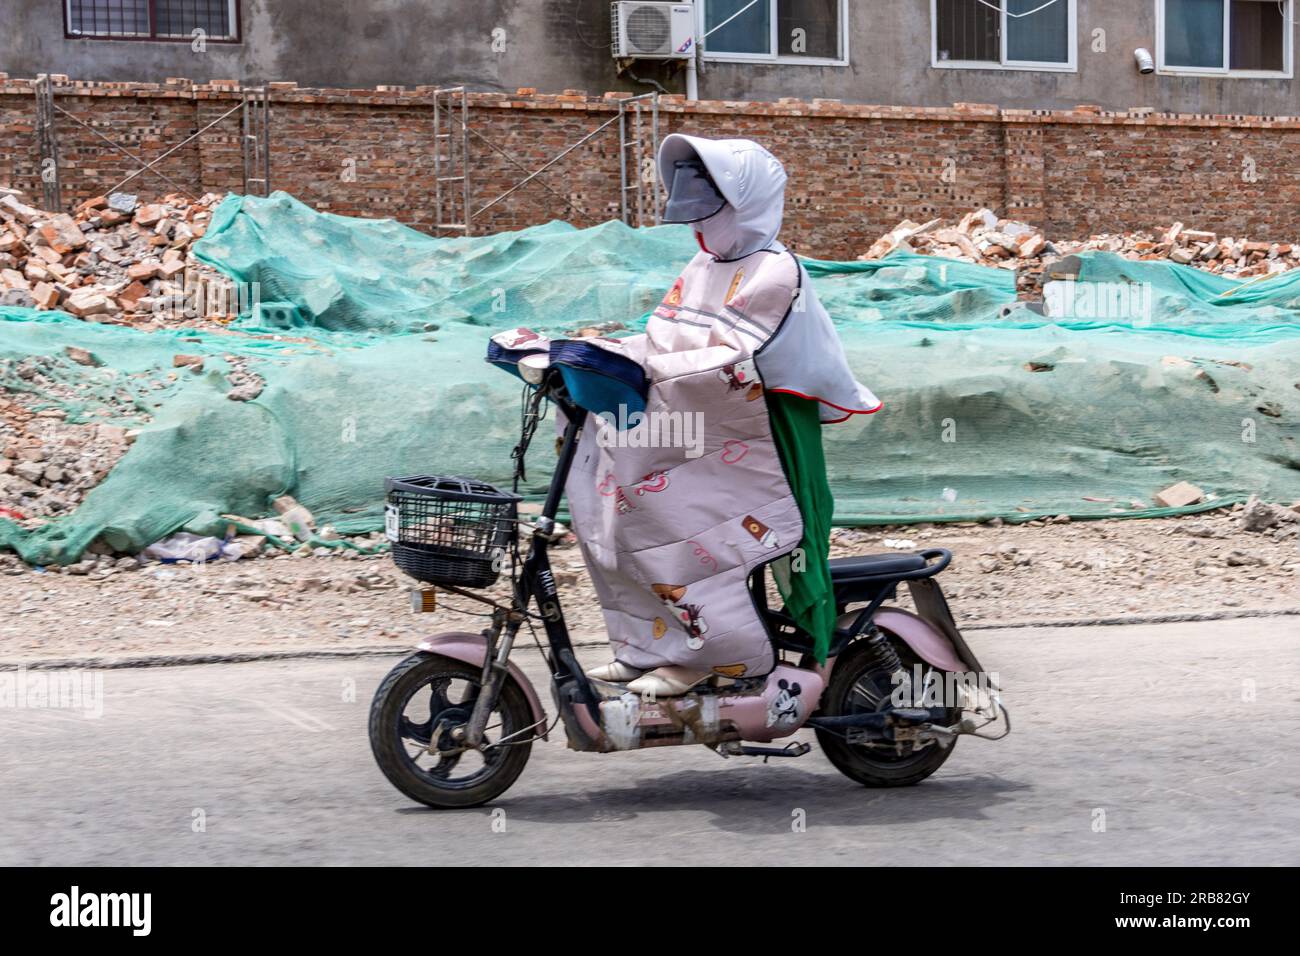 ANYANG, CHINA - JULY 8, 2023 - A pedestrian wearing protective clothing riding on a street in a temperature of 40 degrees Celsius in Hua County, Anyan Stock Photo